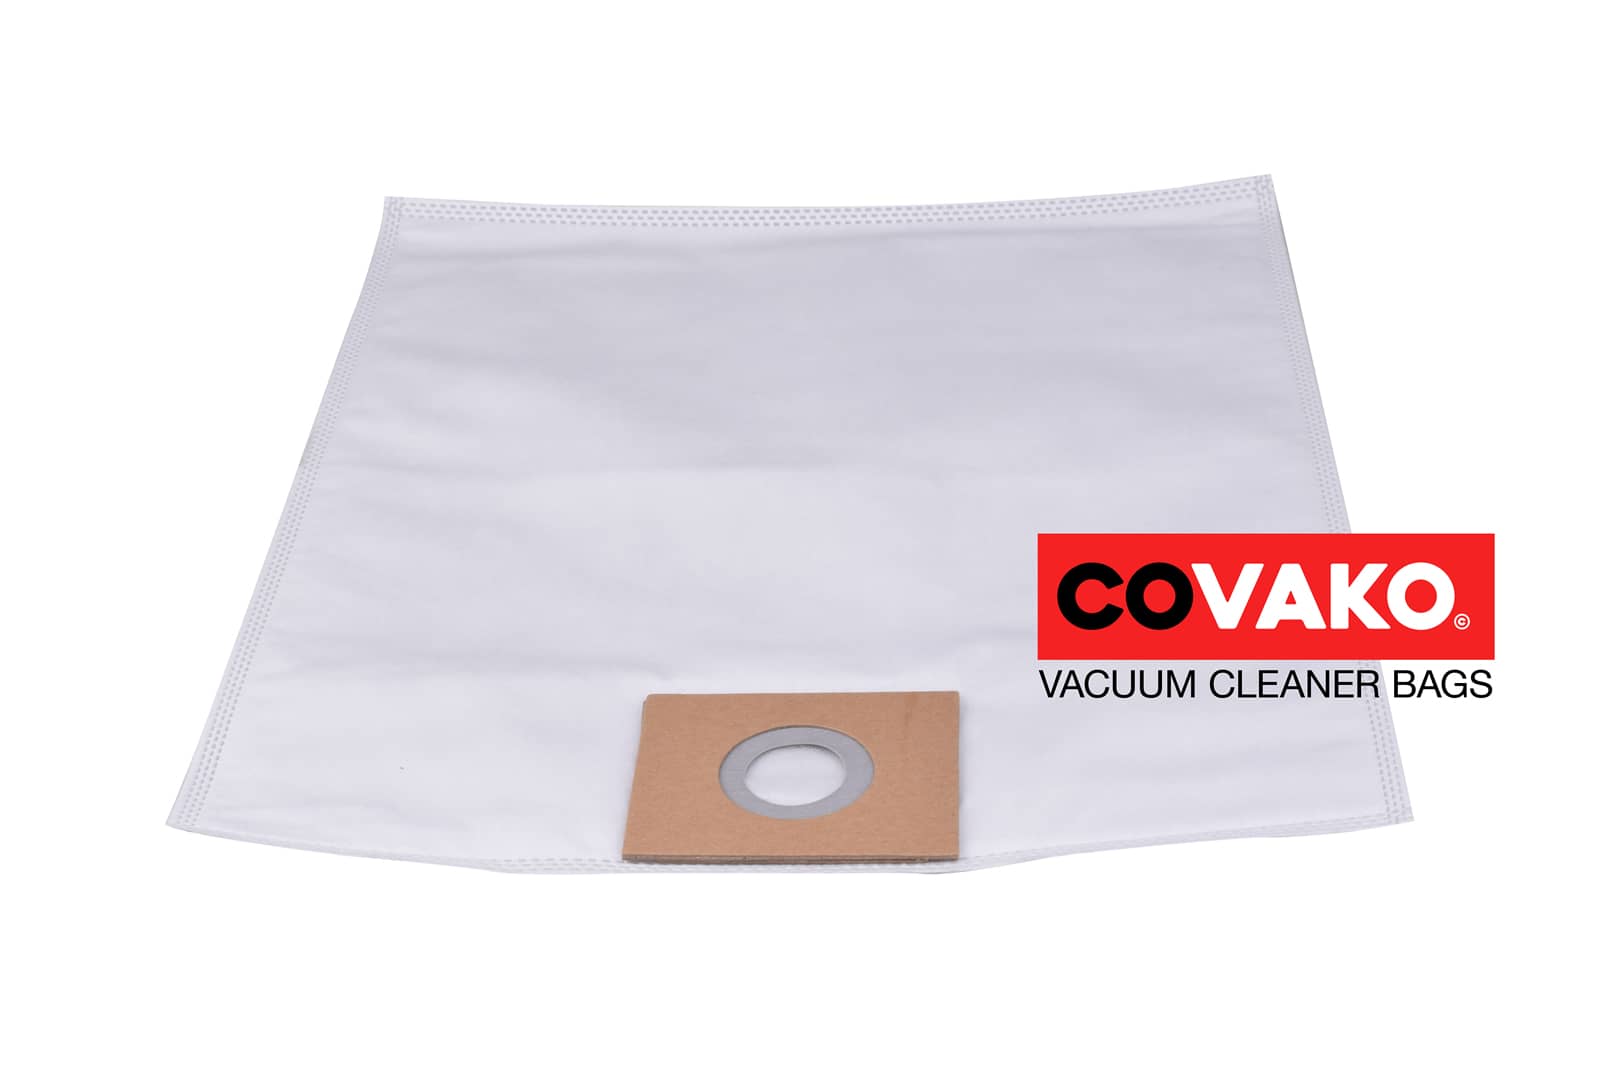 I-vac Dryver 10REH / Synthesis - I-vac vacuum cleaner bags